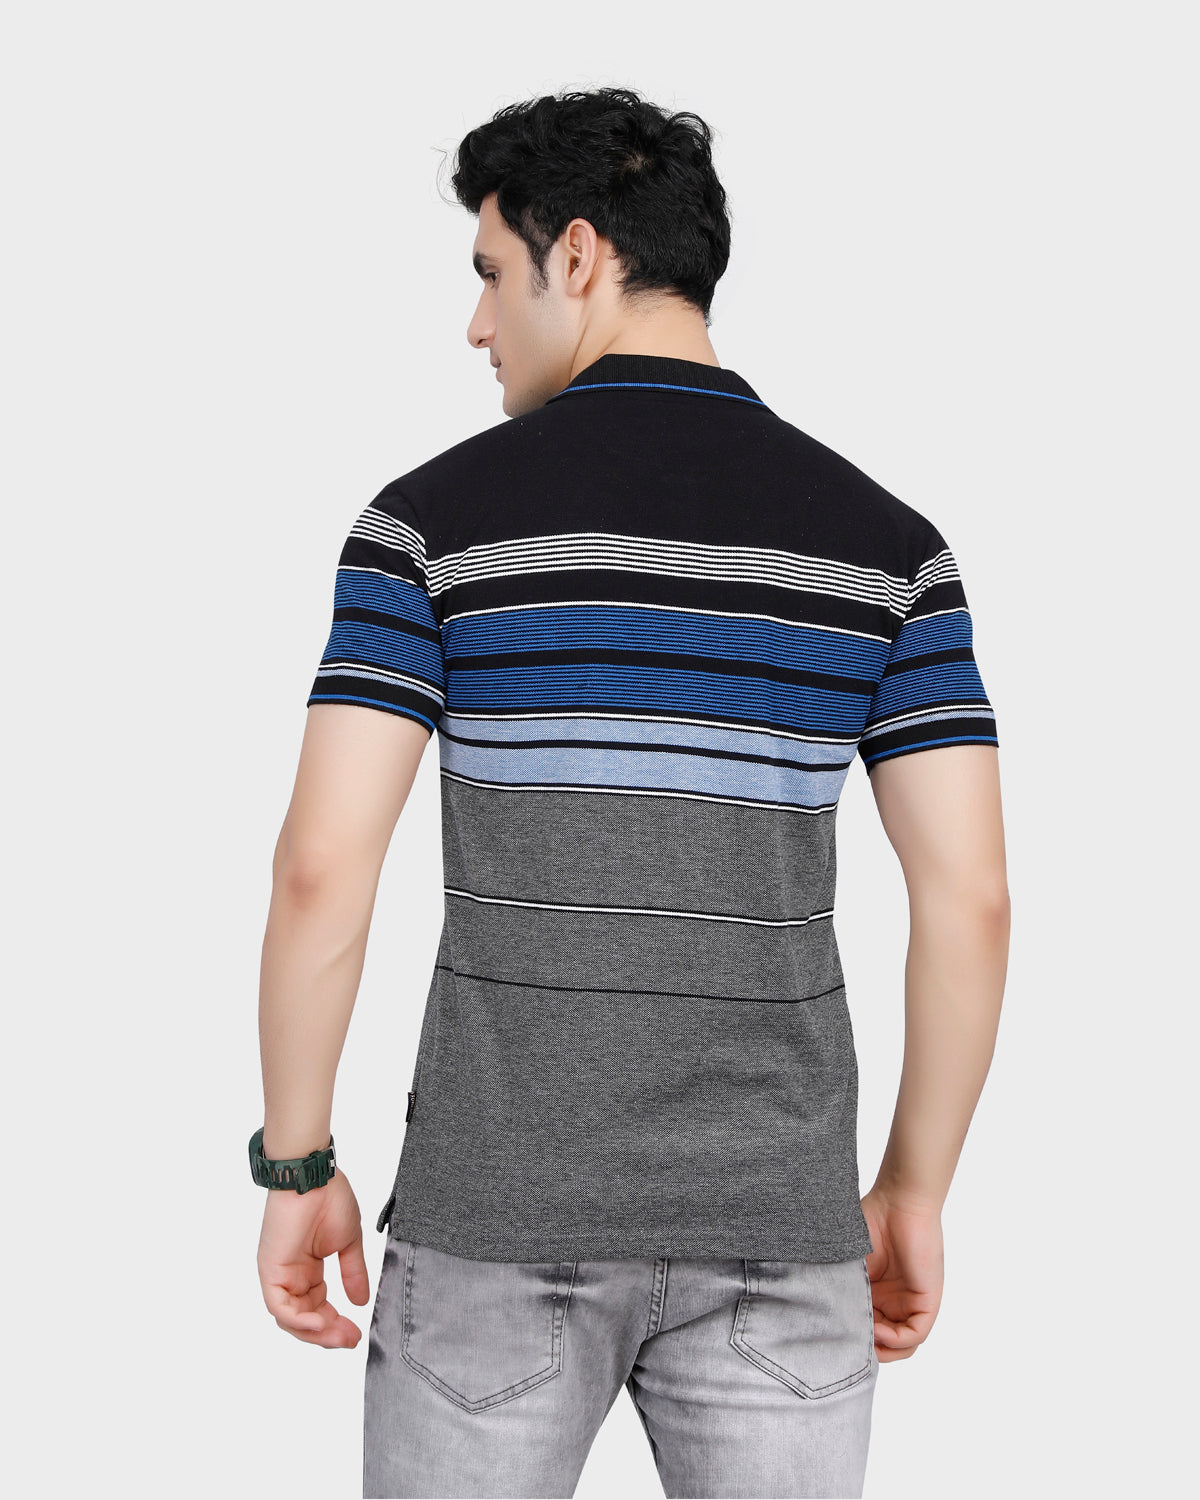 Multicolor Striped Polo T-shirt with Cutaway Collar - Blue/Grey